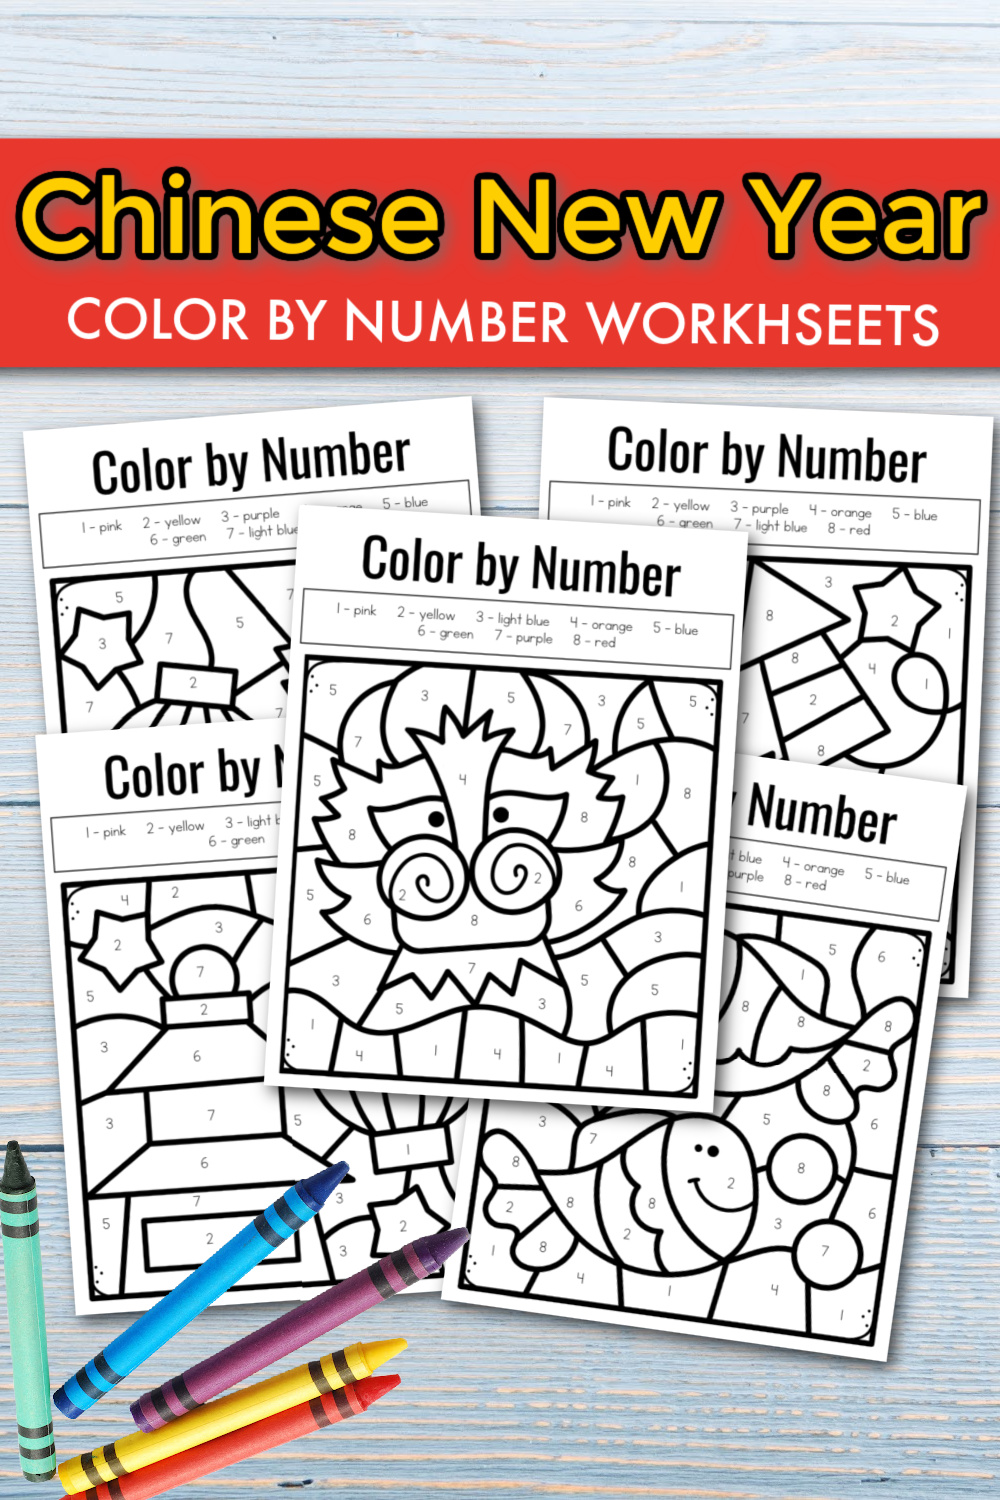 color-by-number-printable-sheets Chinese New Year Color by Number